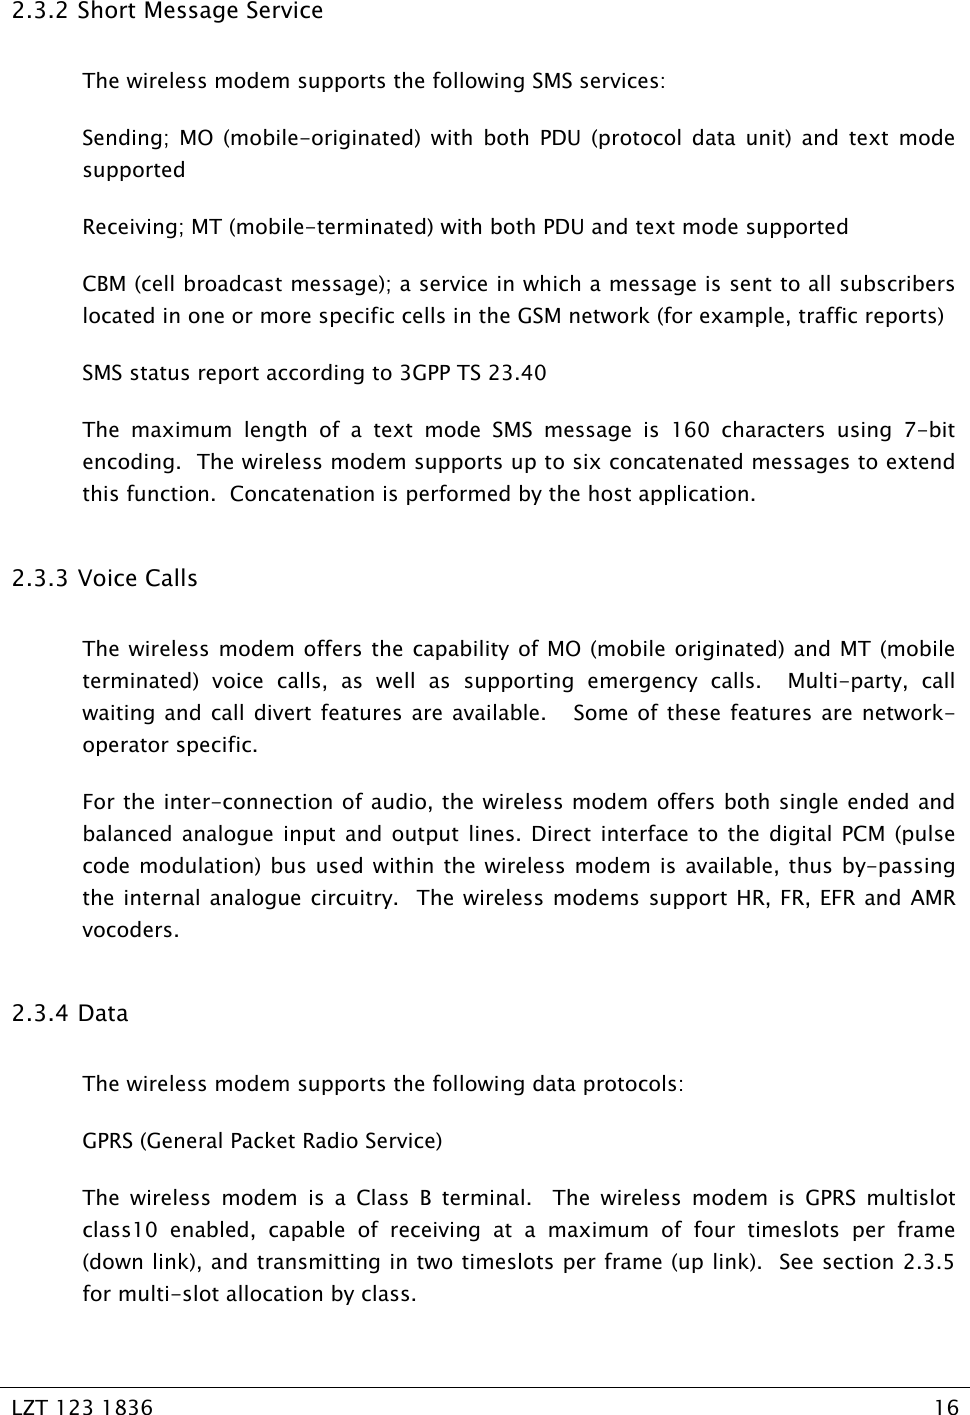   LZT 123 1836  16   2.3.2  Short Message Service The wireless modem supports the following SMS services: Sending; MO (mobile-originated) with both PDU (protocol data unit) and text mode supported Receiving; MT (mobile-terminated) with both PDU and text mode supported CBM (cell broadcast message); a service in which a message is sent to all subscribers located in one or more specific cells in the GSM network (for example, traffic reports) SMS status report according to 3GPP TS 23.40 The maximum length of a text mode SMS message is 160 characters using 7-bit encoding.  The wireless modem supports up to six concatenated messages to extend this function.  Concatenation is performed by the host application. 2.3.3  Voice Calls The wireless modem offers the capability of MO (mobile originated) and MT (mobile terminated) voice calls, as well as supporting emergency calls.  Multi-party, call waiting and call divert features are available.   Some of these features are network-operator specific. For the inter-connection of audio, the wireless modem offers both single ended and balanced analogue input and output lines. Direct interface to the digital PCM (pulse code modulation) bus used within the wireless modem is available, thus by-passing the internal analogue circuitry.  The wireless modems support HR, FR, EFR and AMR vocoders. 2.3.4  Data The wireless modem supports the following data protocols: GPRS (General Packet Radio Service) The wireless modem is a Class B terminal.  The wireless modem is GPRS multislot class10 enabled, capable of receiving at a maximum of four timeslots per frame (down link), and transmitting in two timeslots per frame (up link).  See section 2.3.5 for multi-slot allocation by class. 